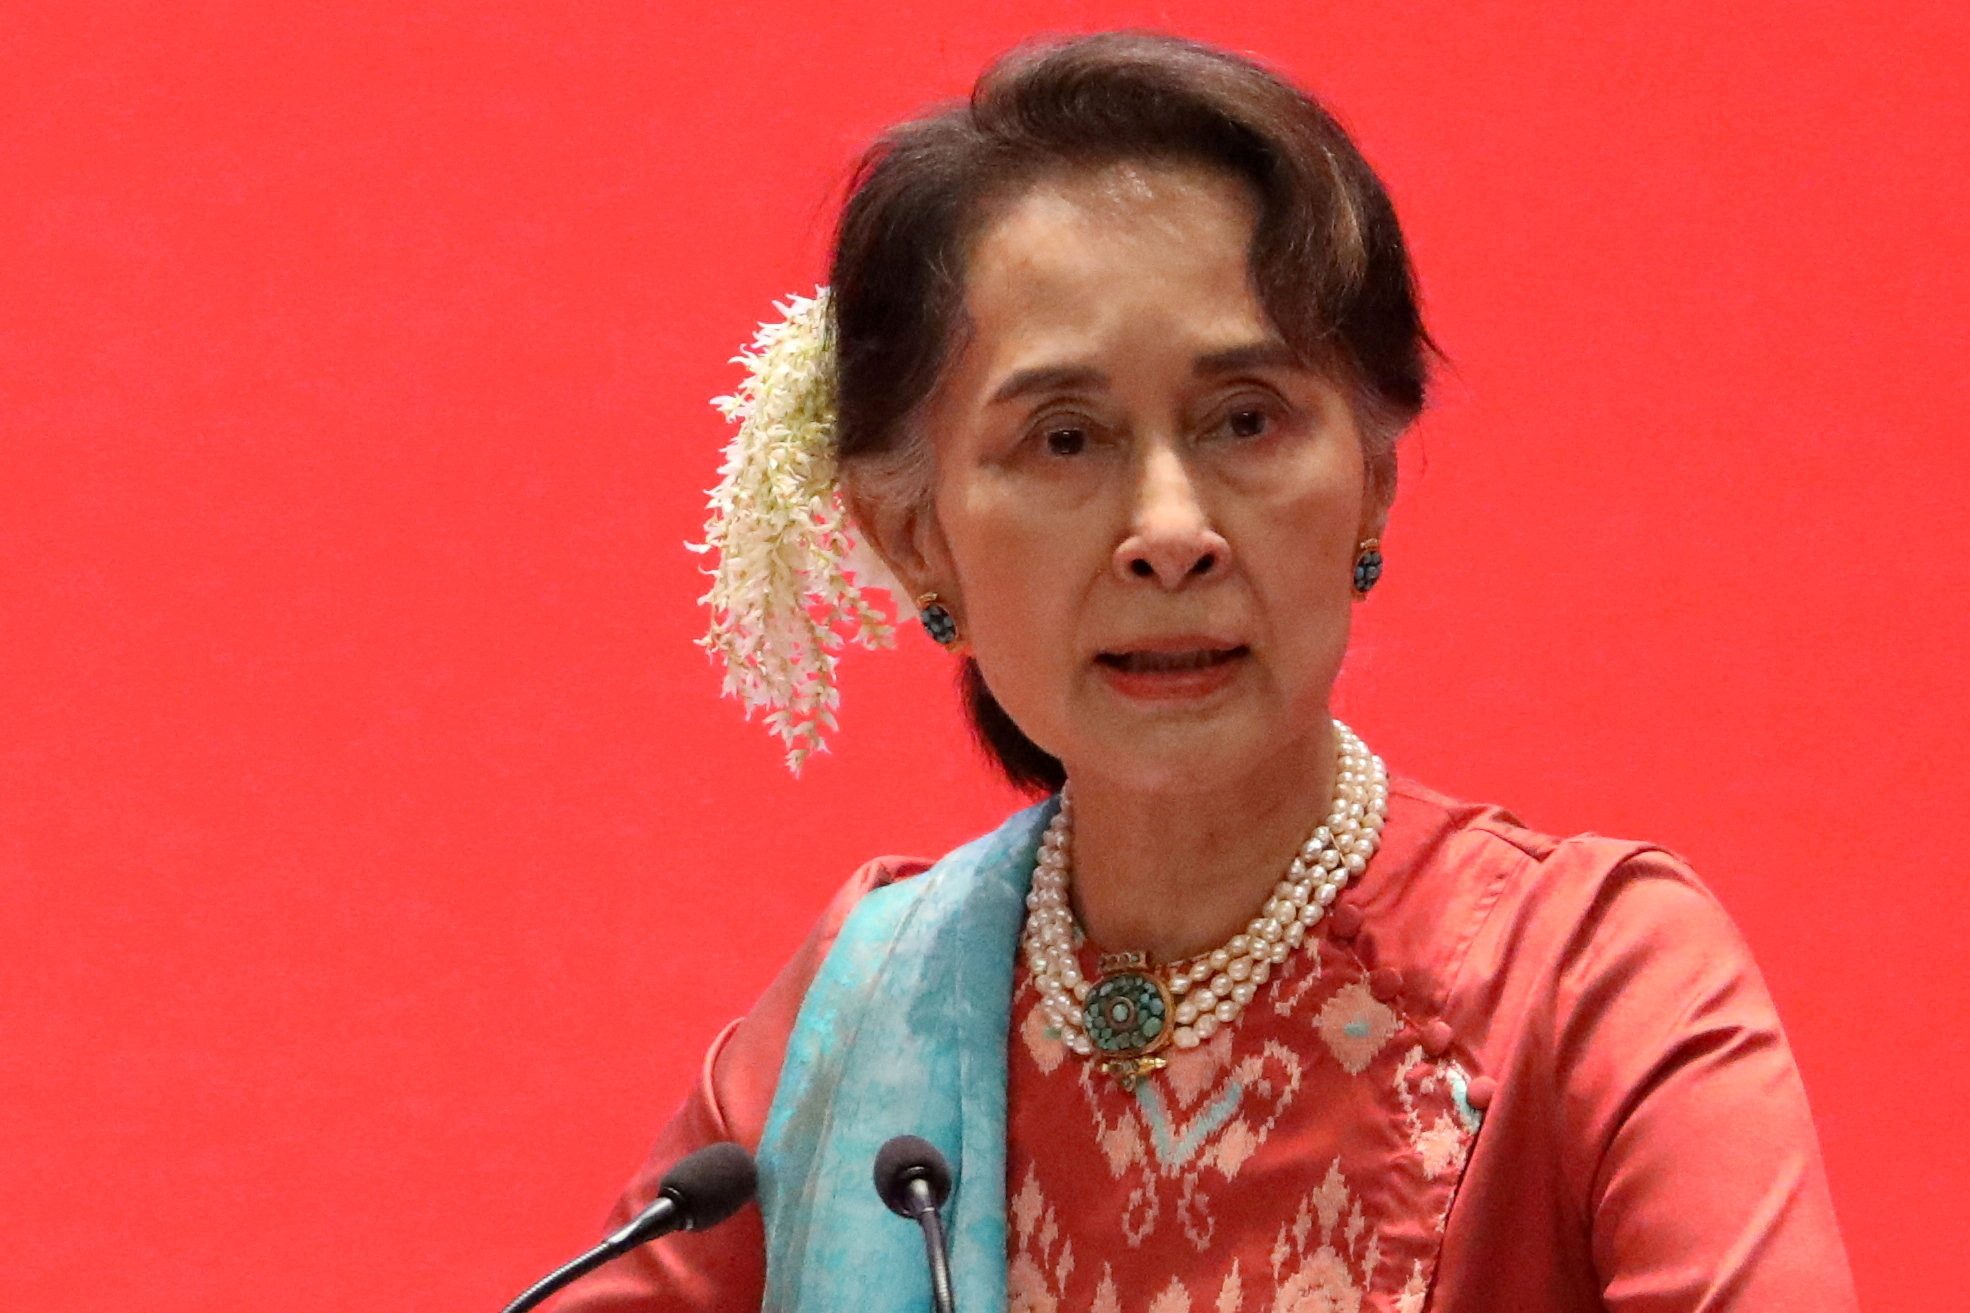 Myanmar military may move Suu Kyi to house arrest – media